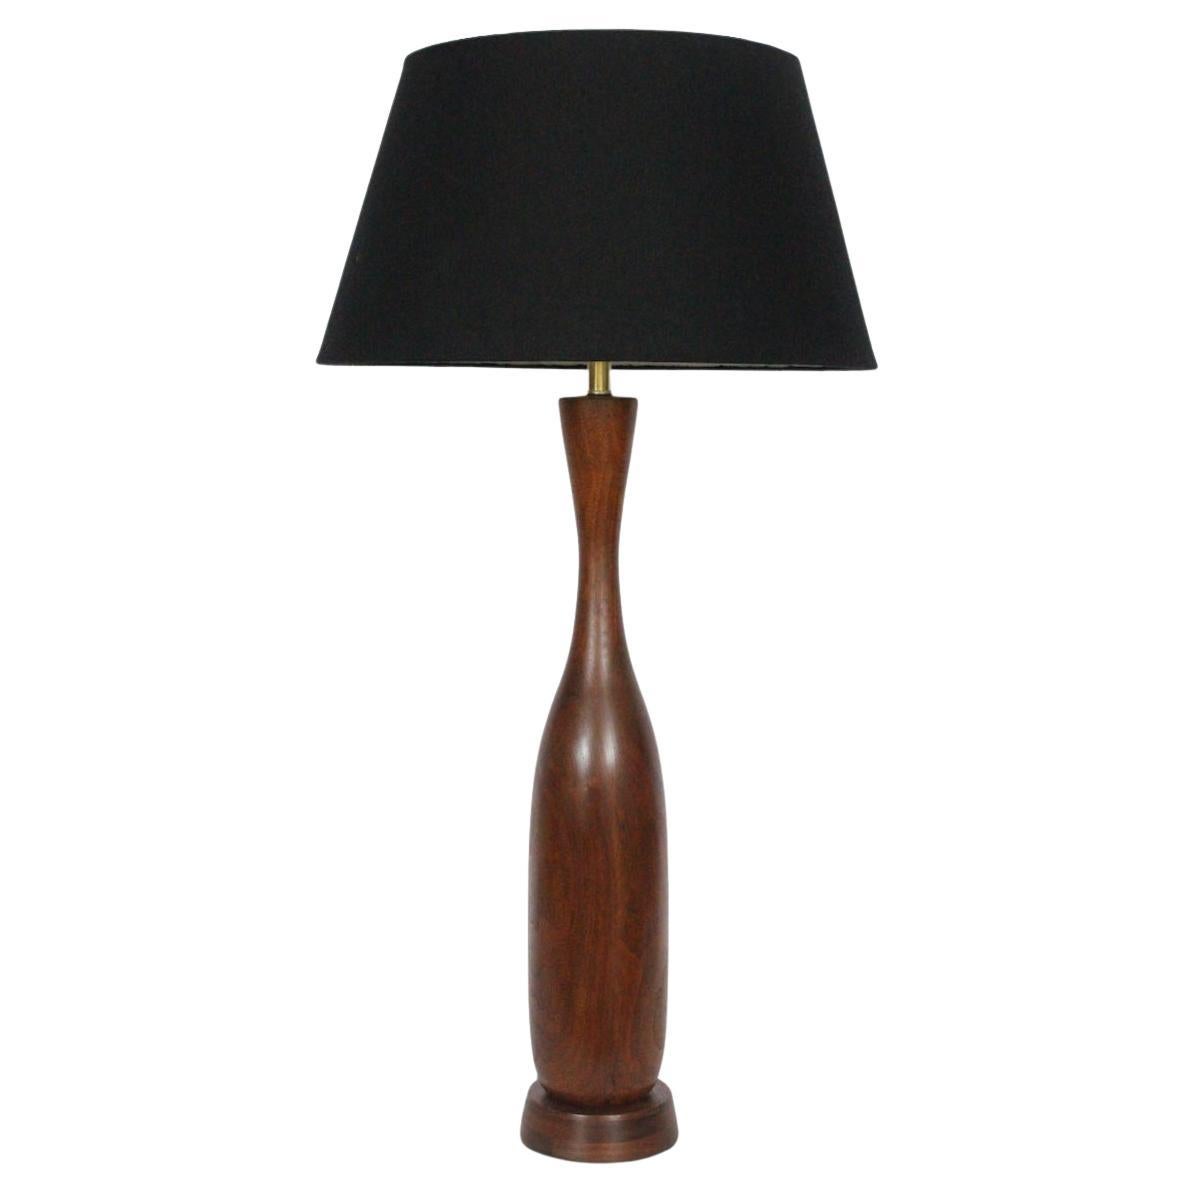 Substantial New Hope School Solid Walnut Table Lamp, circa 1960